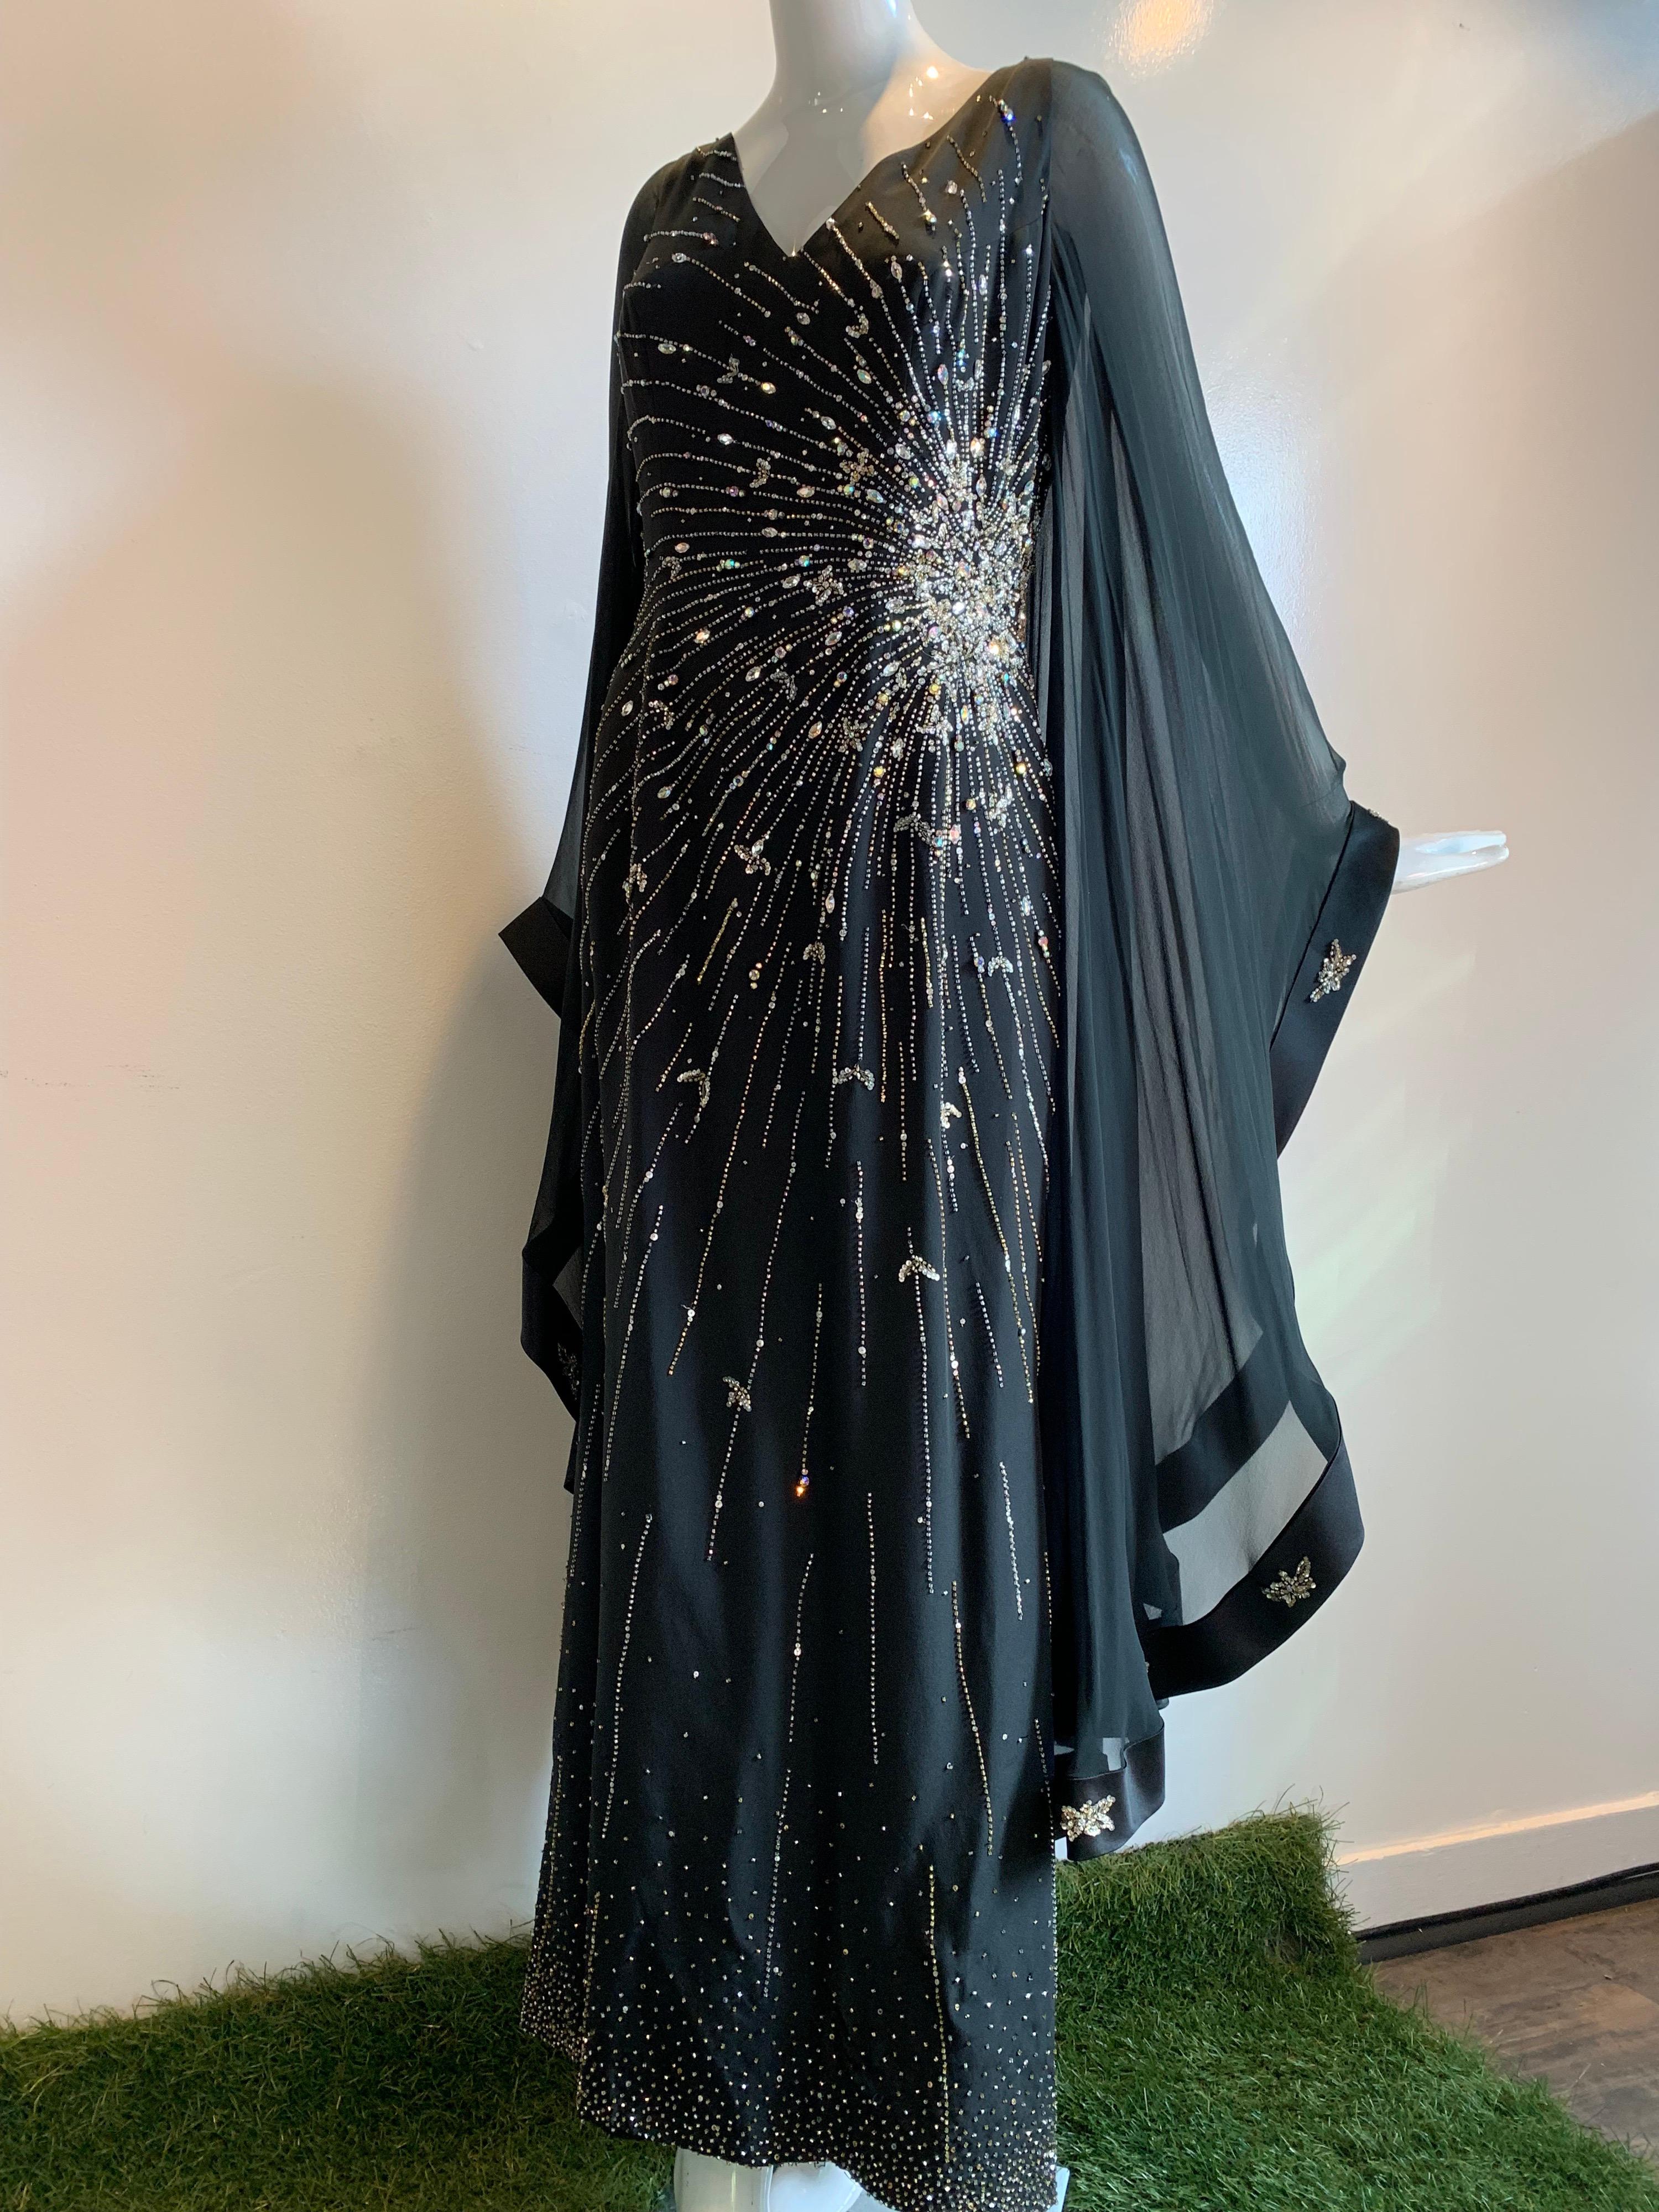 A spectacular 1970s Alan Cherry black silk chiffon Goddess-style evening gown with a huge starburst of star-shine across the body from hip to bust in beadwork and rhinestones.  Sleeves are angel-wing style edged in silk satin with beaded medallions. 